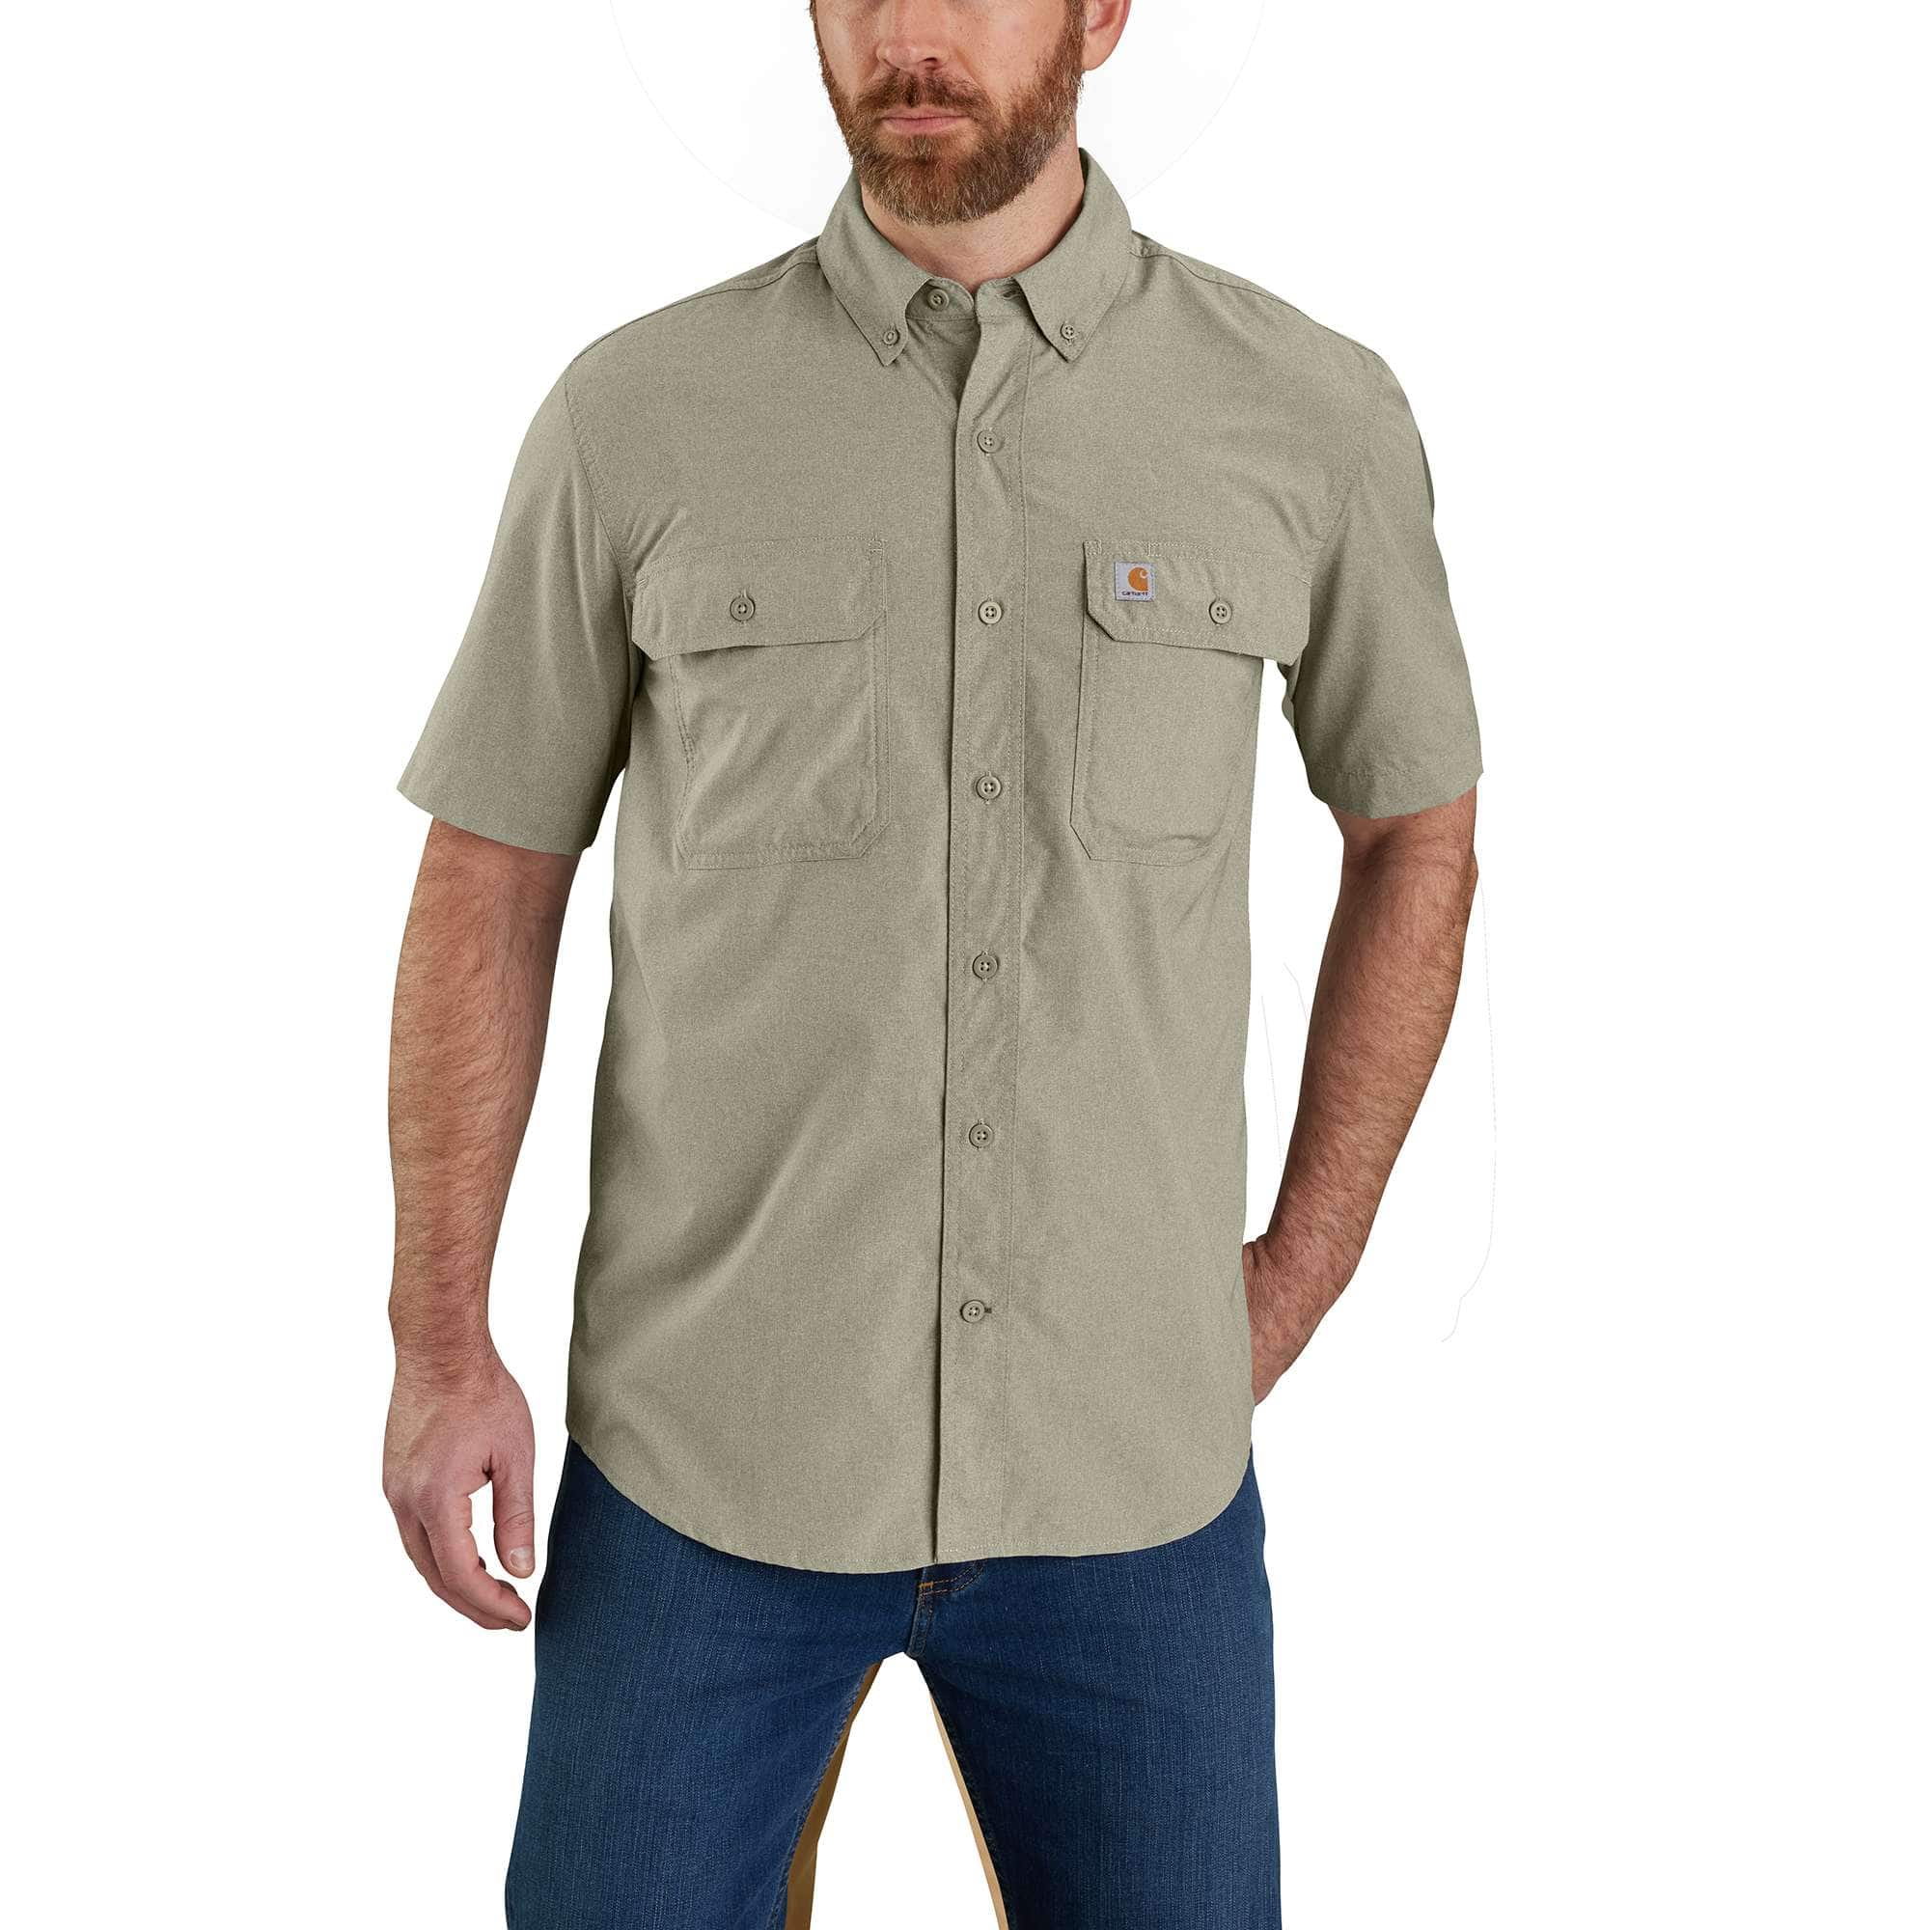 Carhartt Force Vented Button Down Fishing Shirt Relaxed Fit S/S Men's Med  Plaid